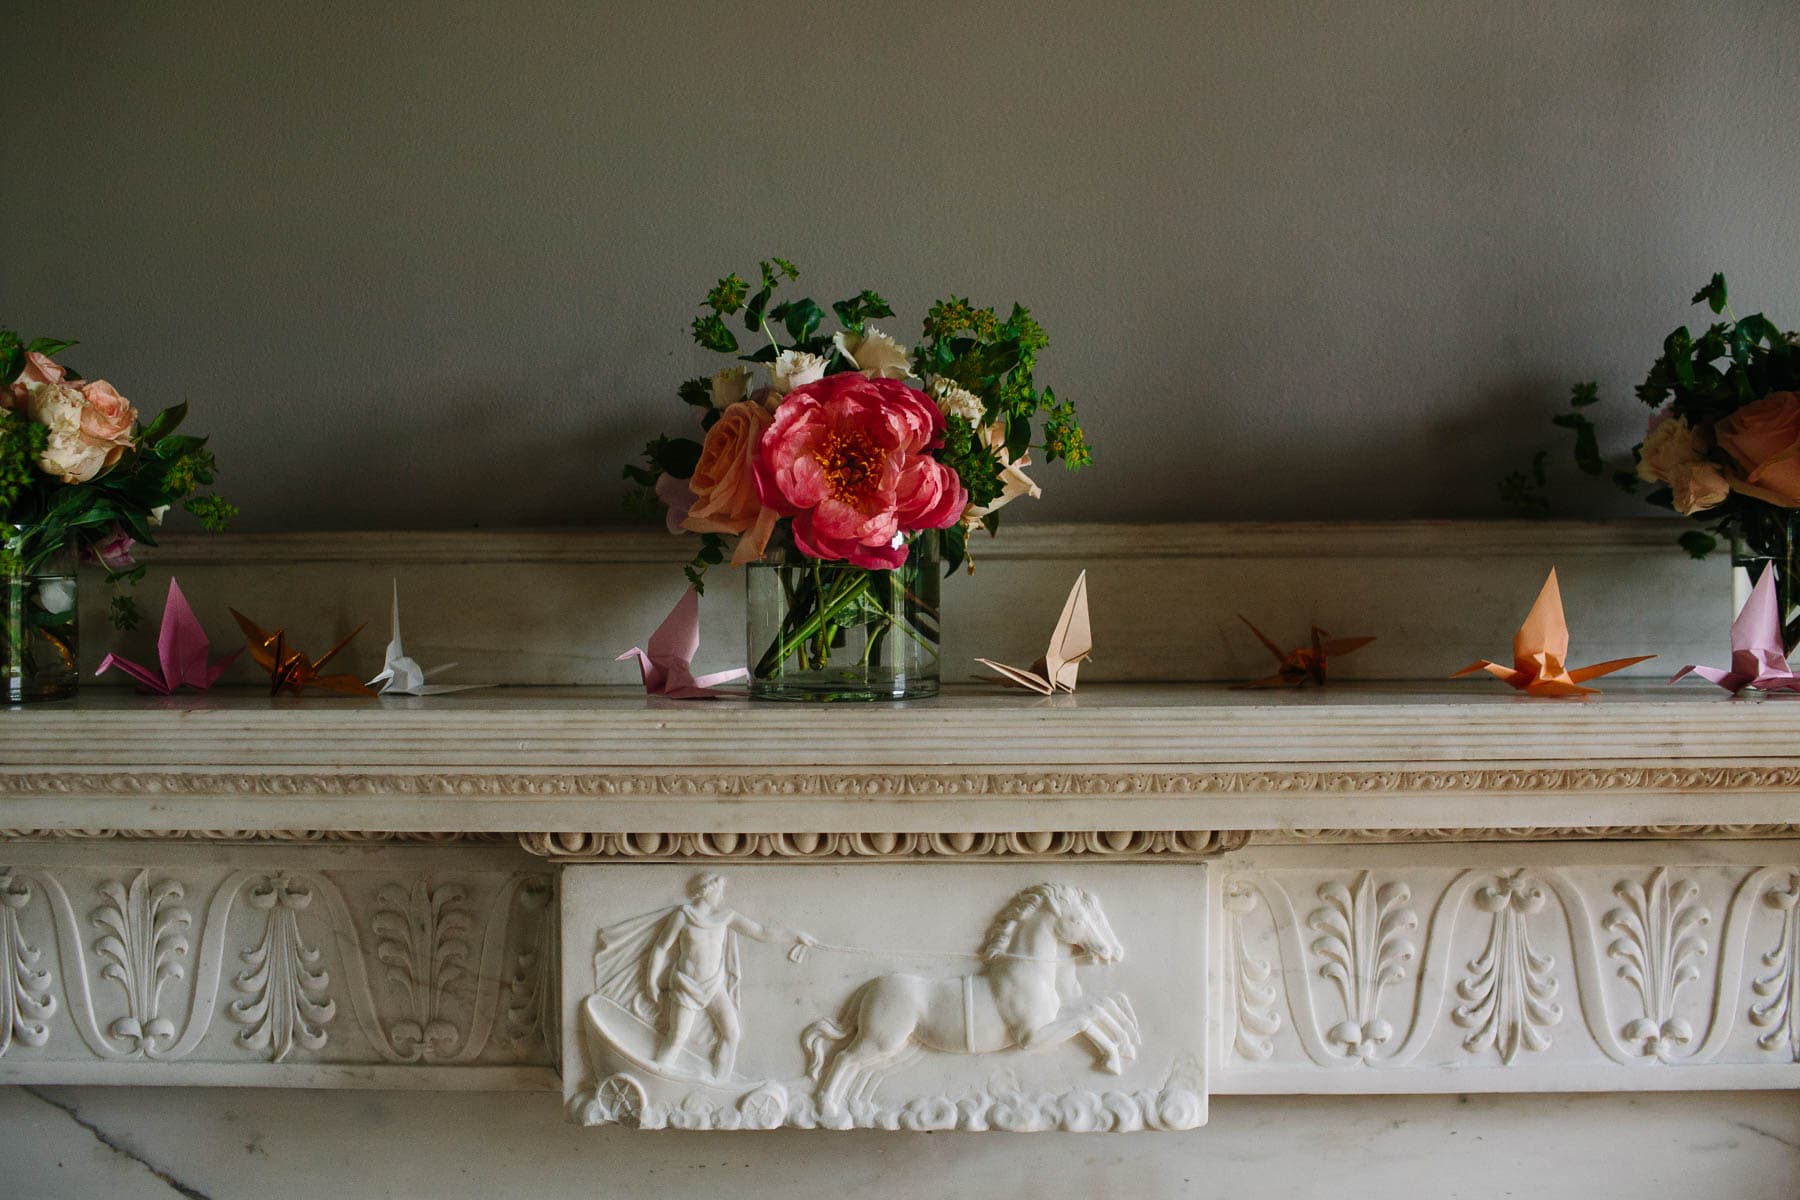 flowers and paper cranes on the mantel in the Lyman Estate ballroom